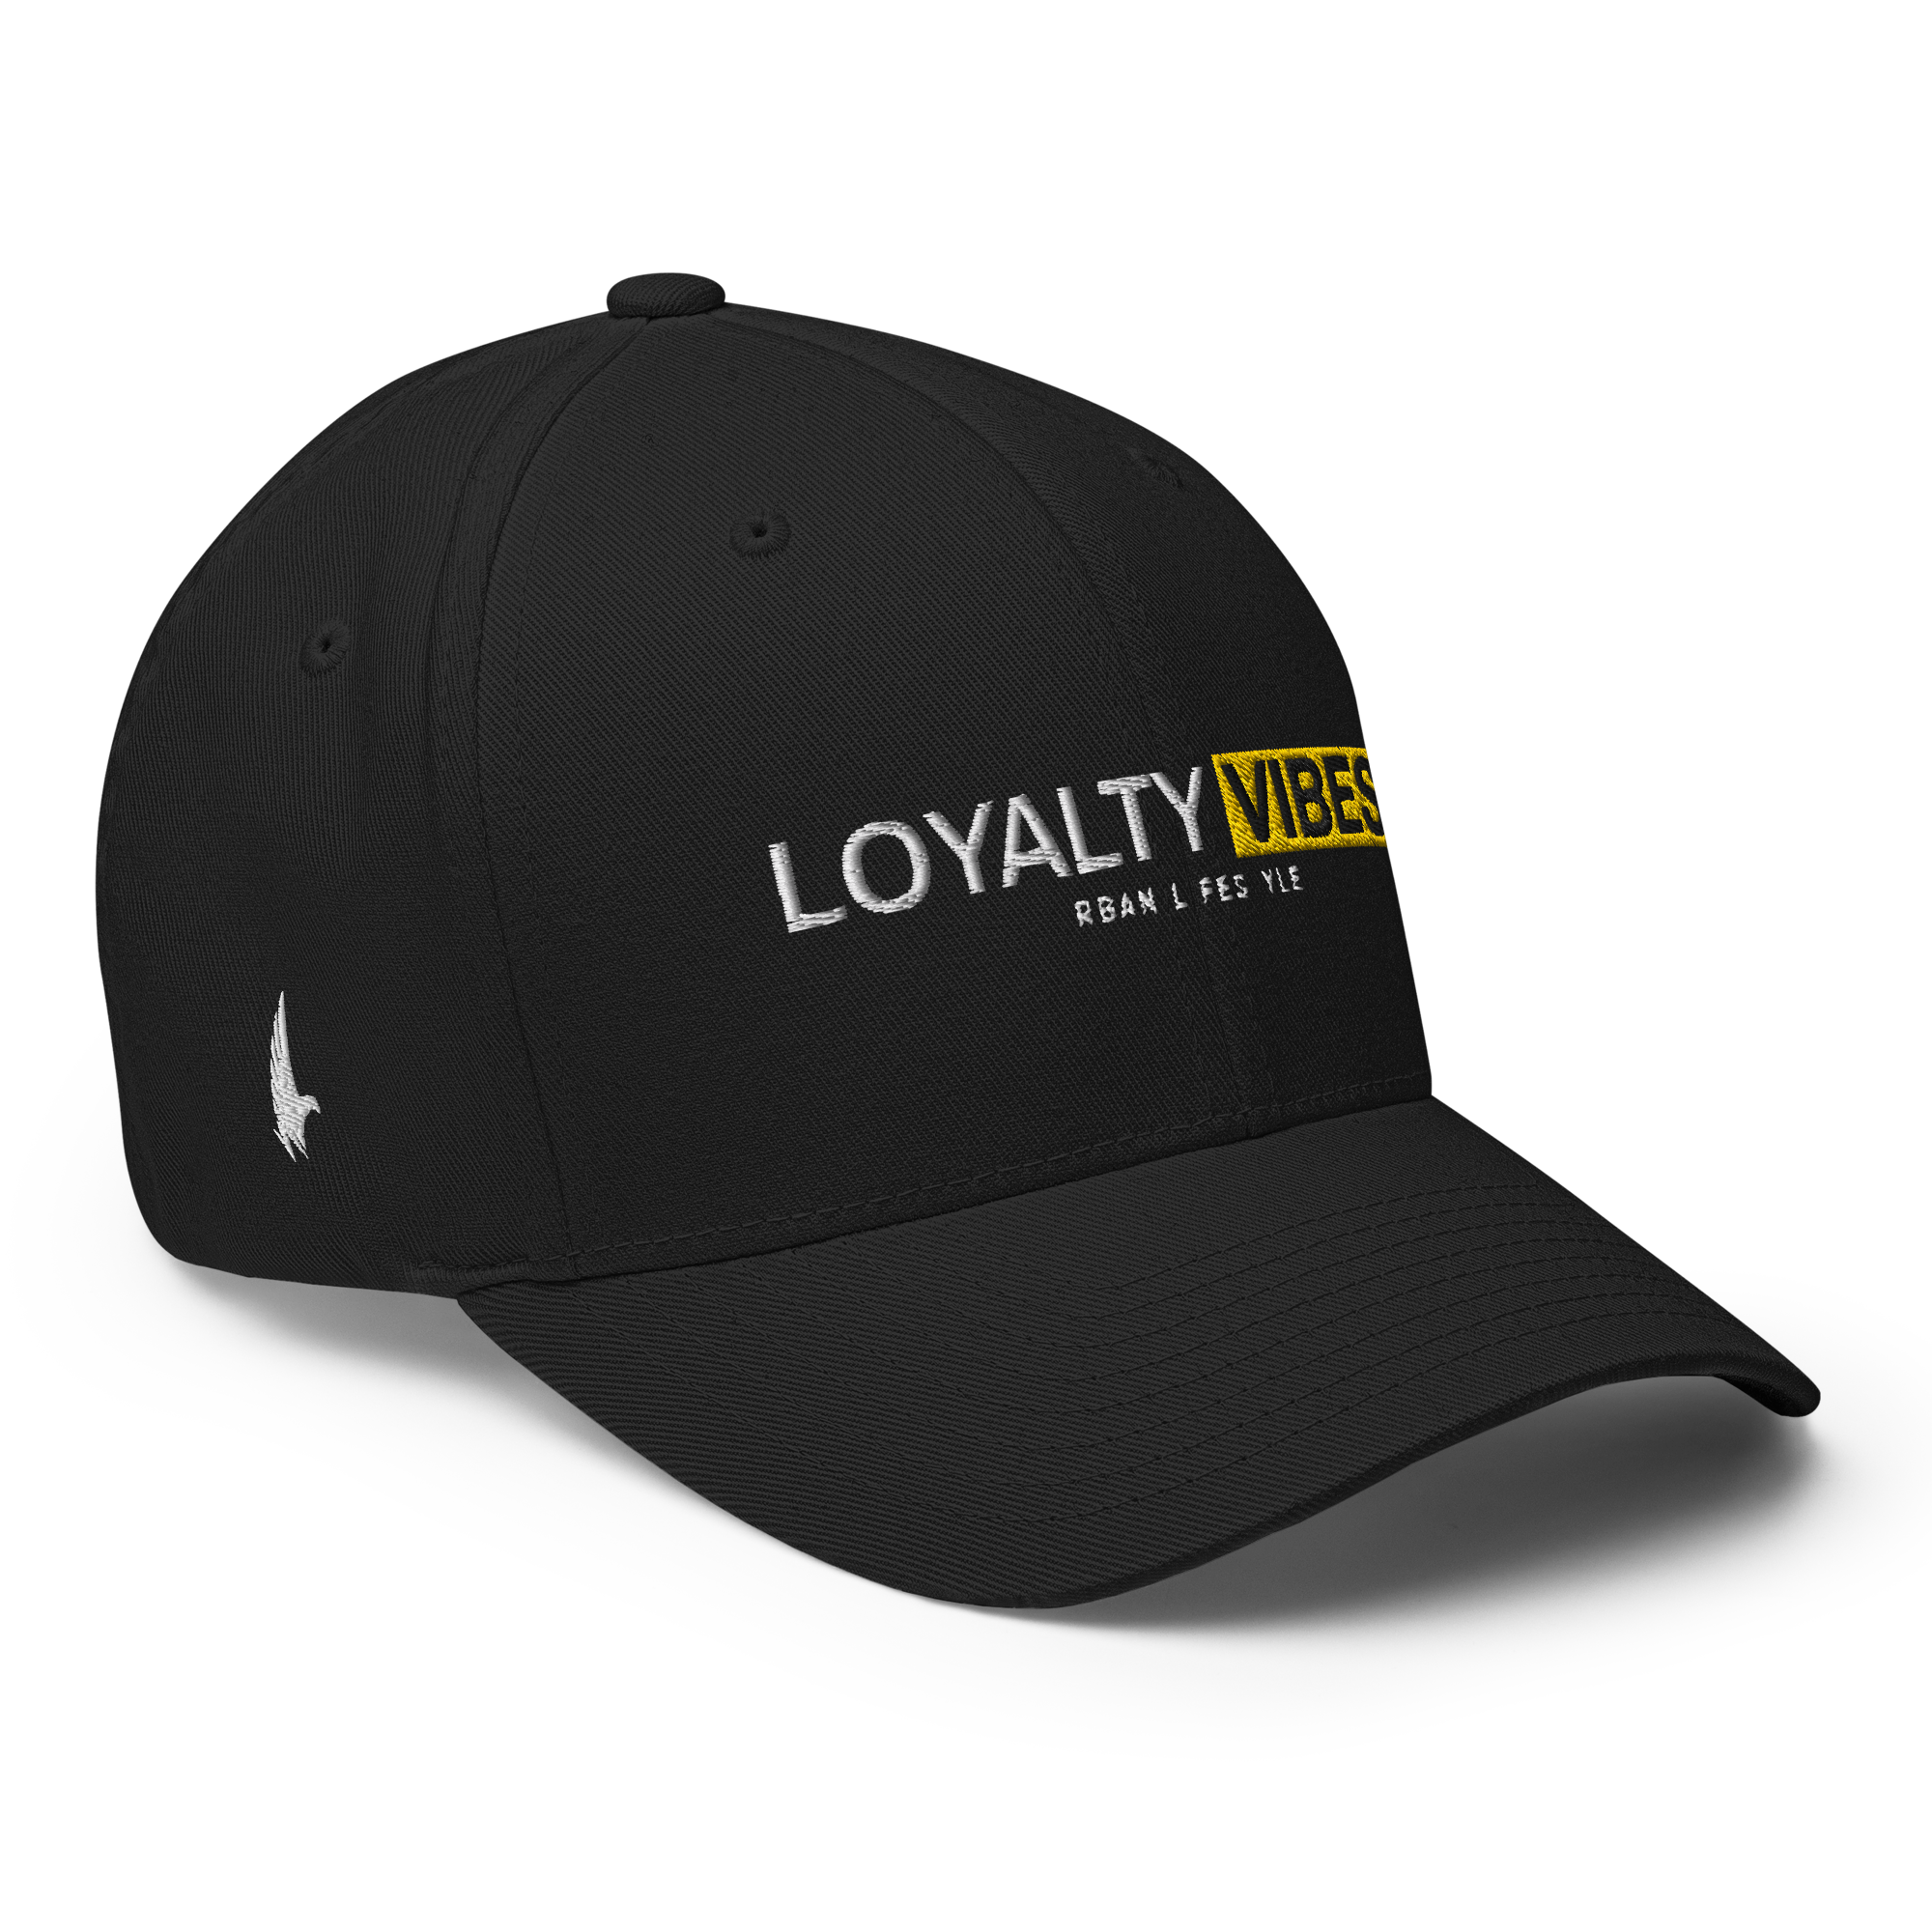 Lifestyle Logo Fitted Hat Black - Loyalty Vibes